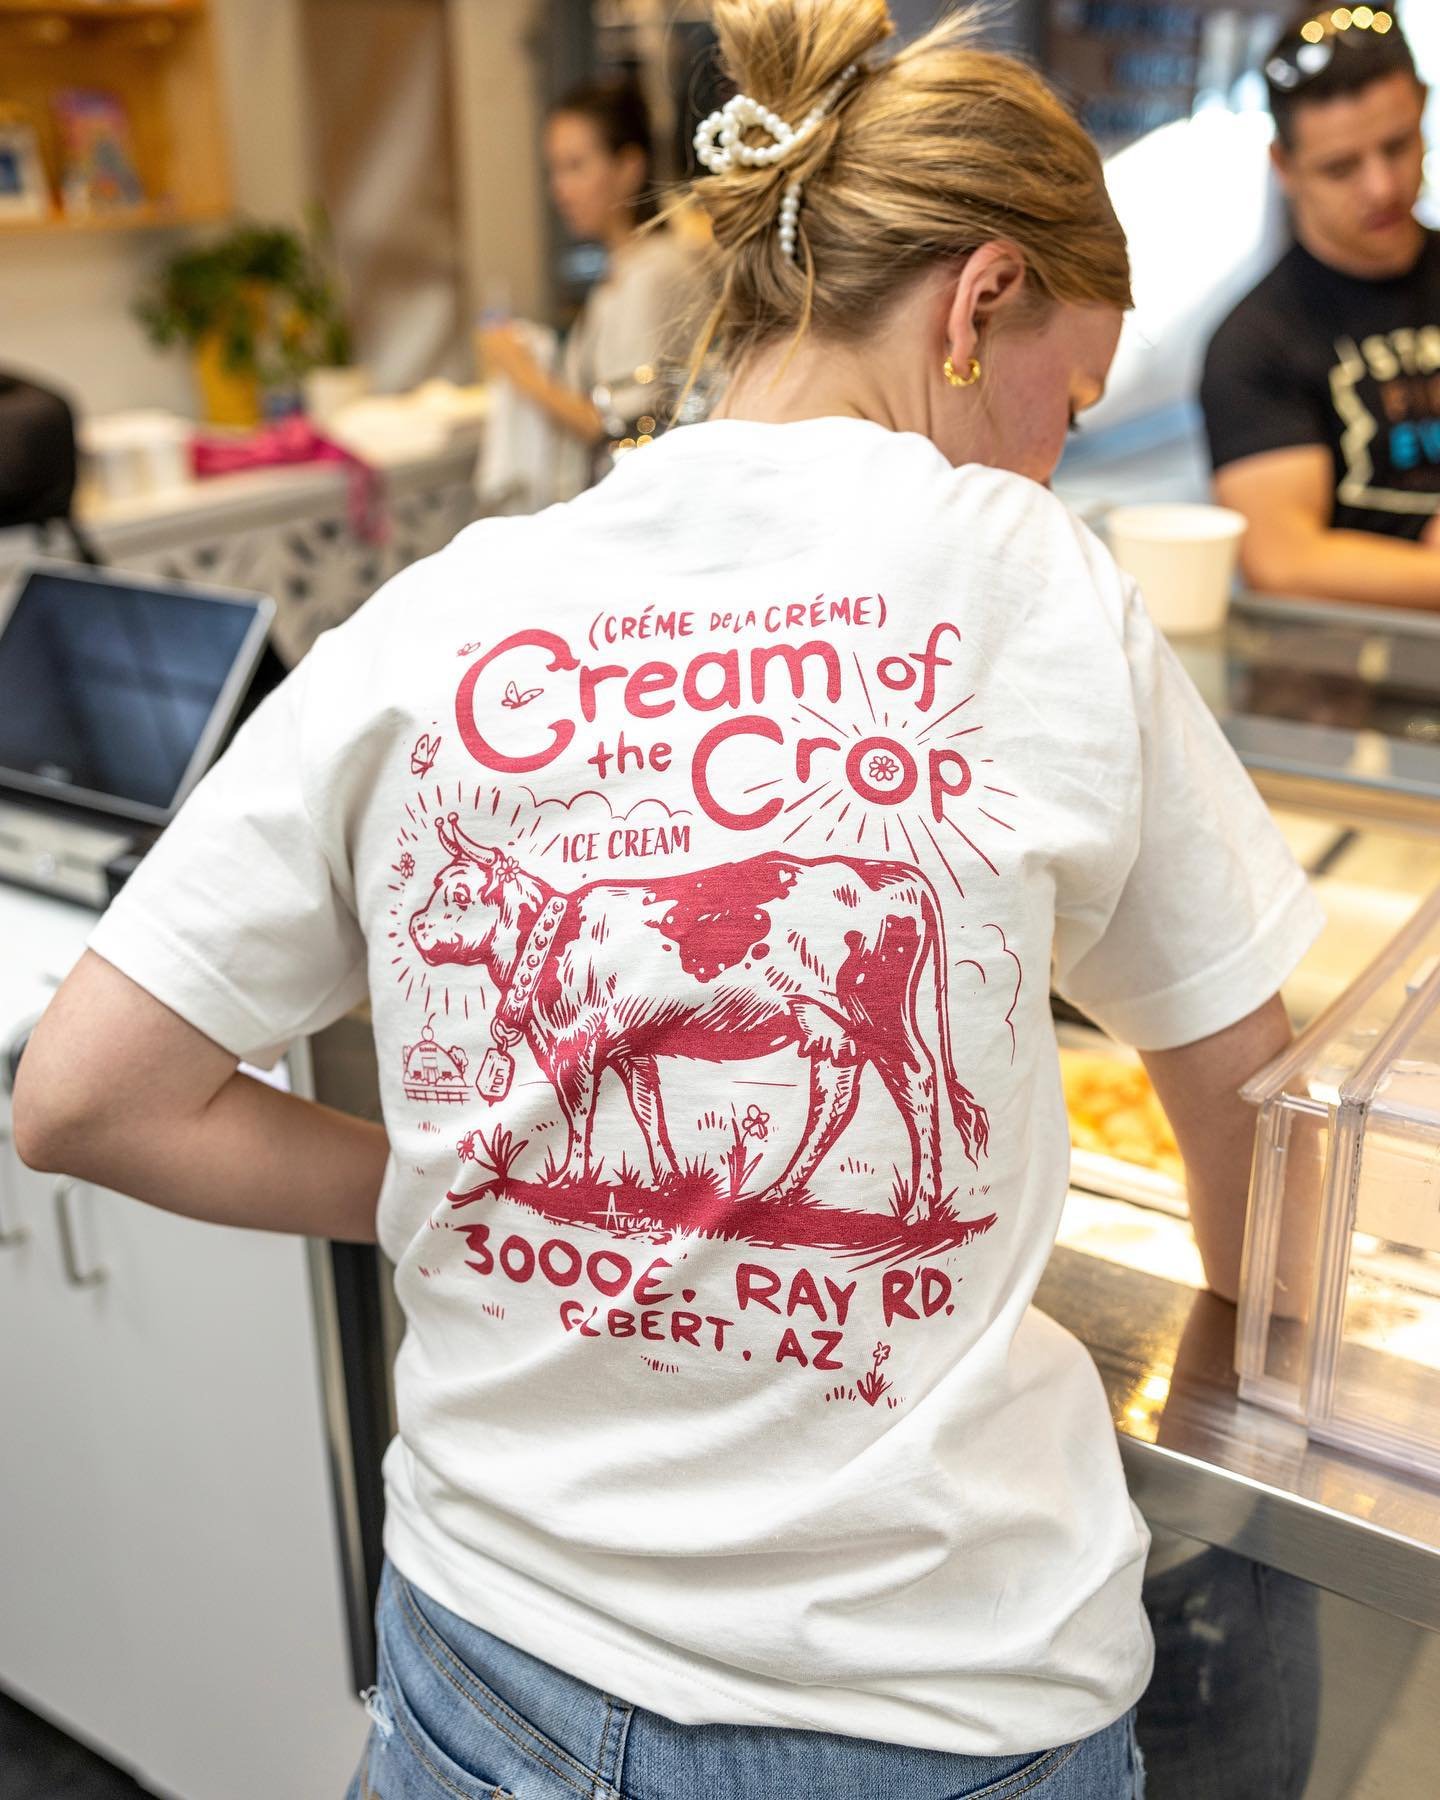 New tees are now available in the shop!

Designed by @jonarvizu, these tees pay homage to the cows who make our ice cream possible!

Grab them for $25 each while supplies last!